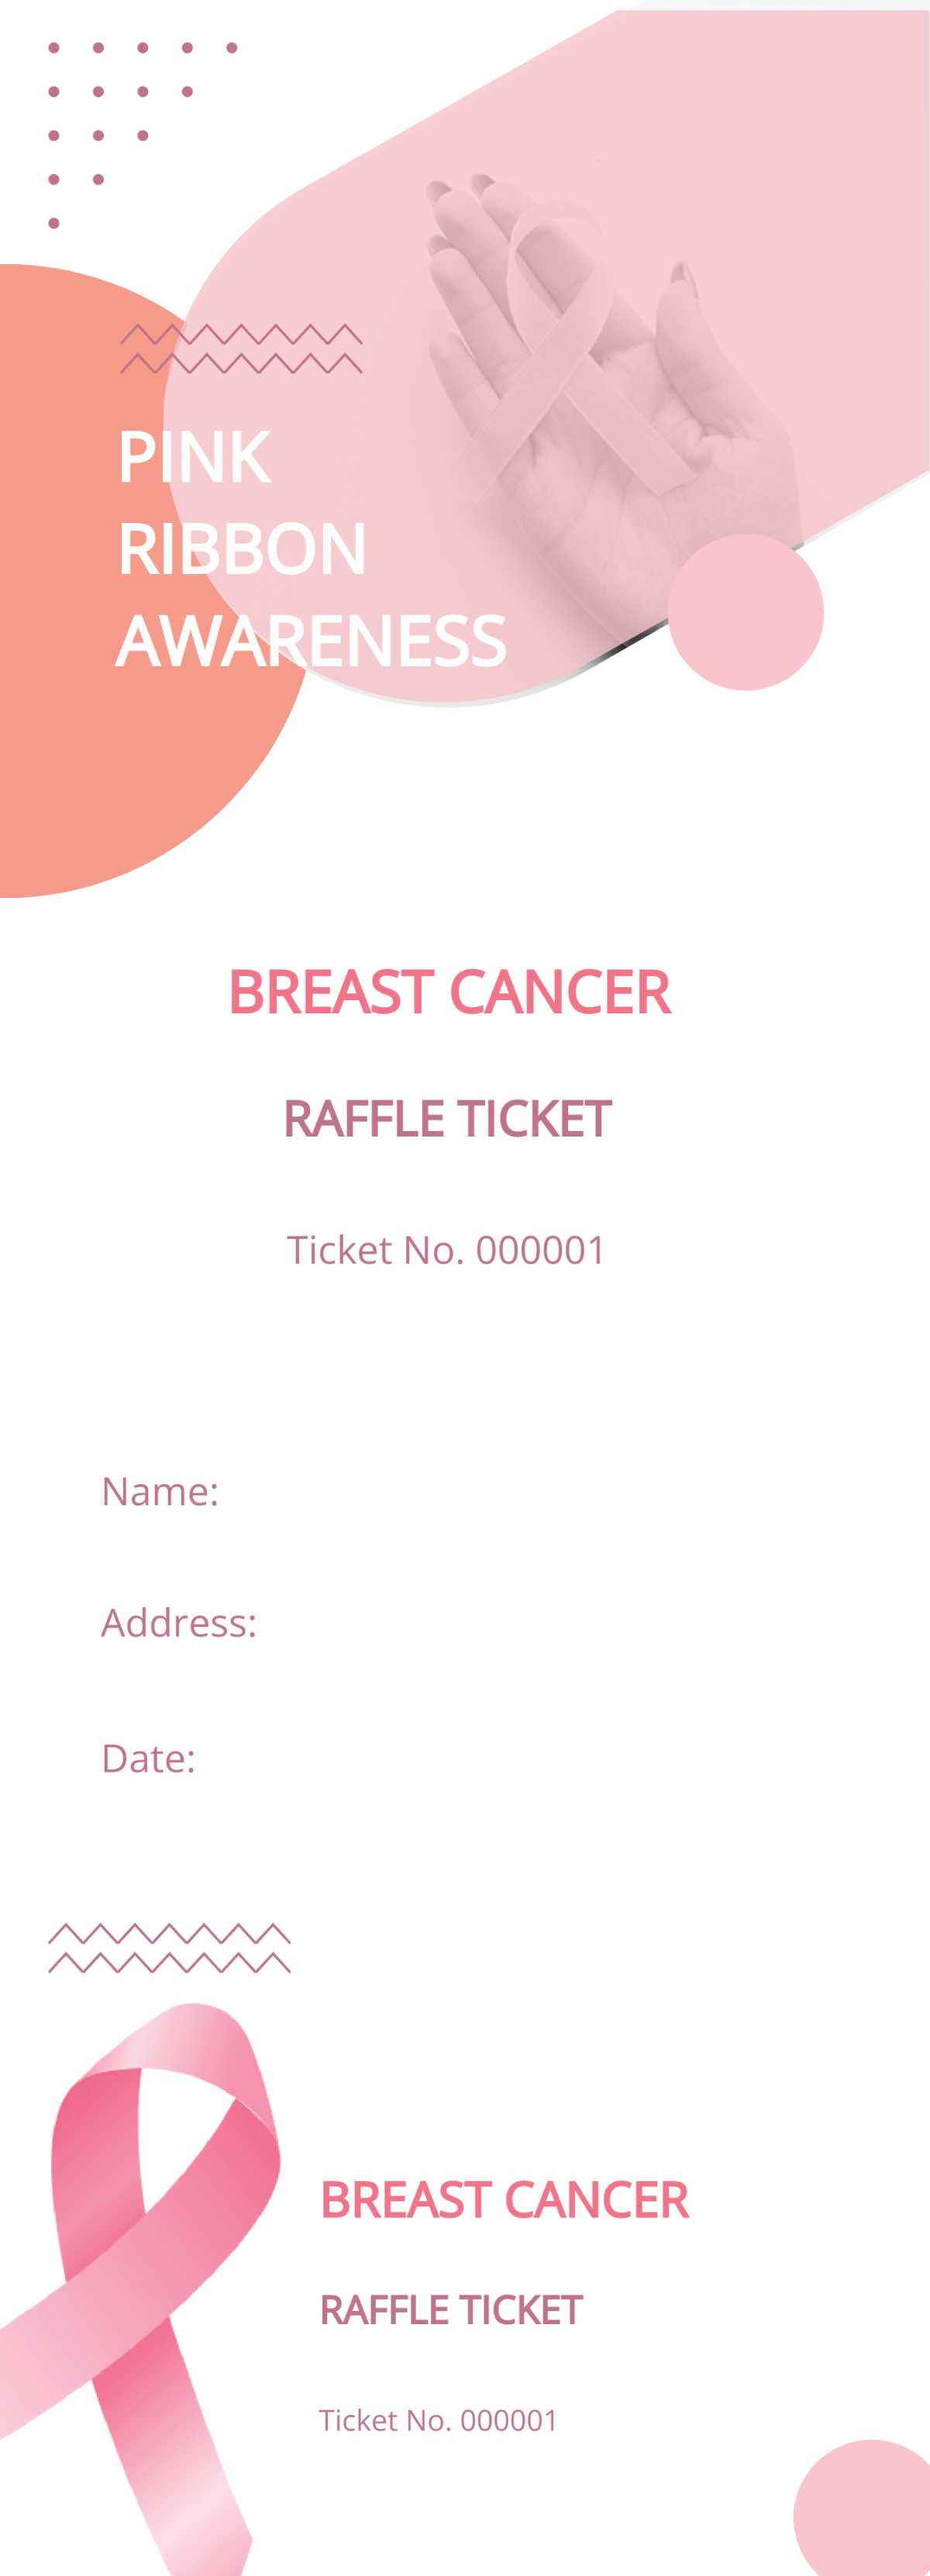 Breast Cancer Raffle Ticket Template